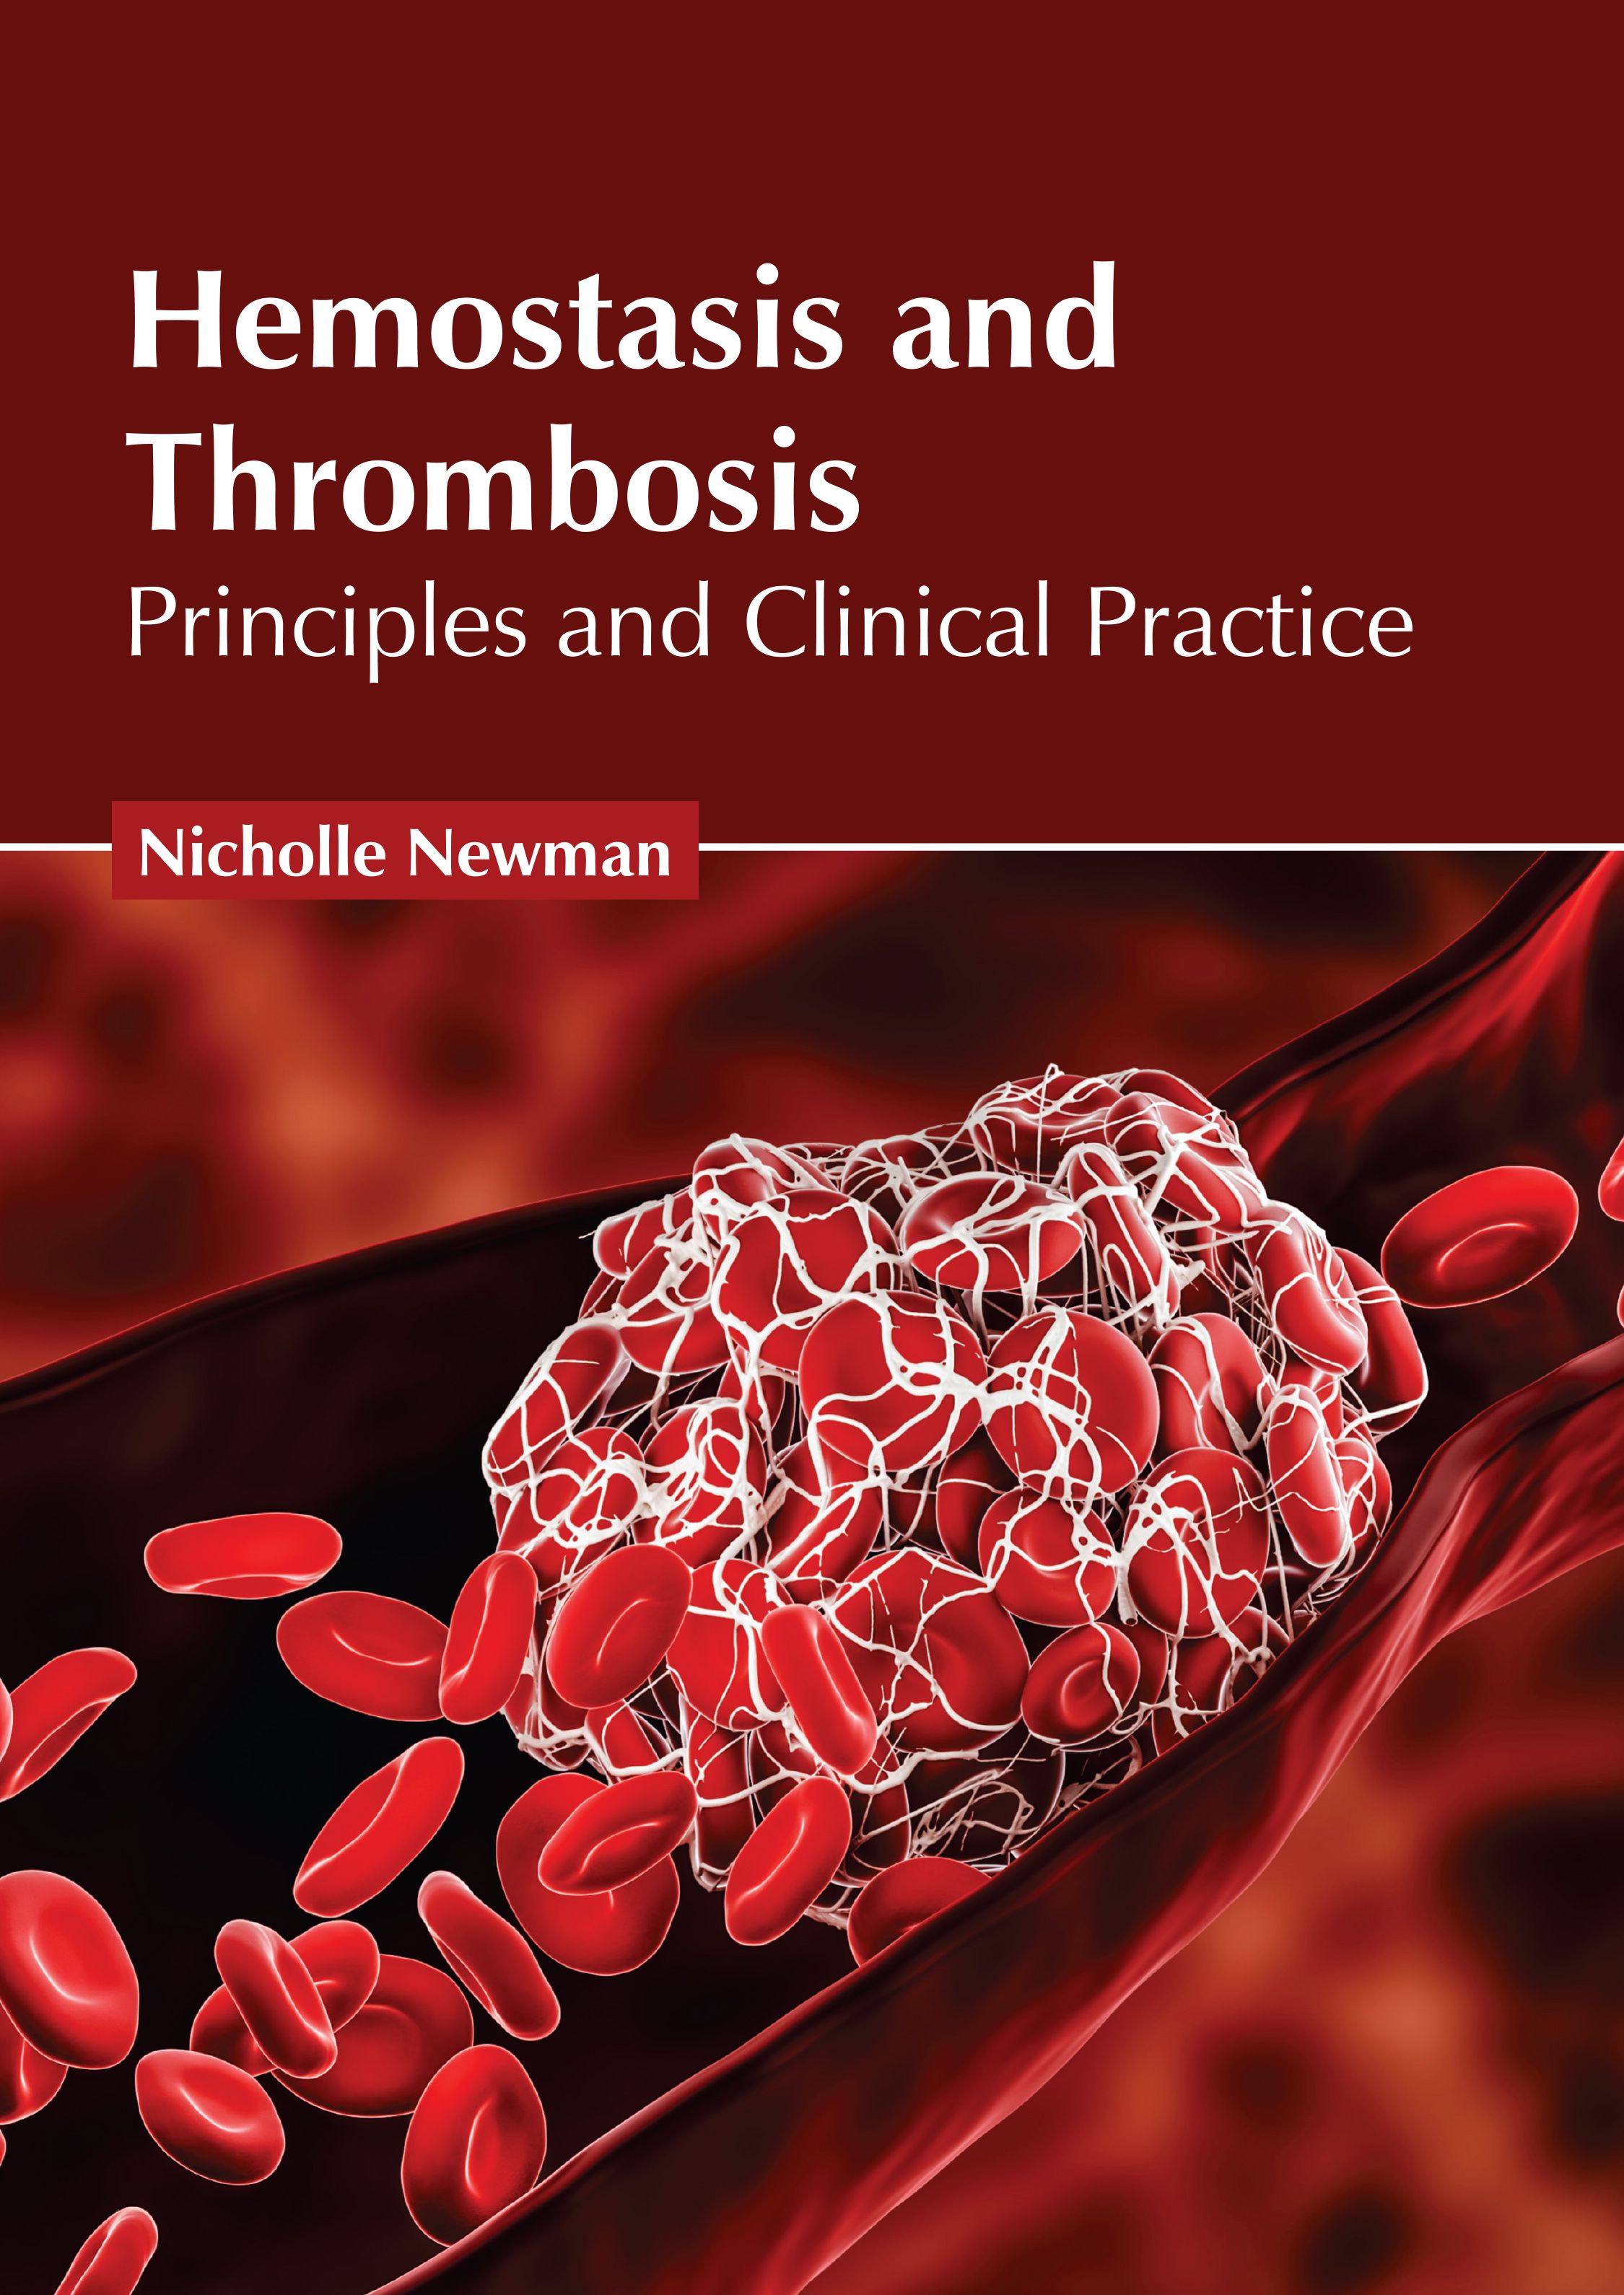 

exclusive-publishers/american-medical-publishers/hemostasis-and-thrombosis-principles-and-clinical-practice-9798887401799